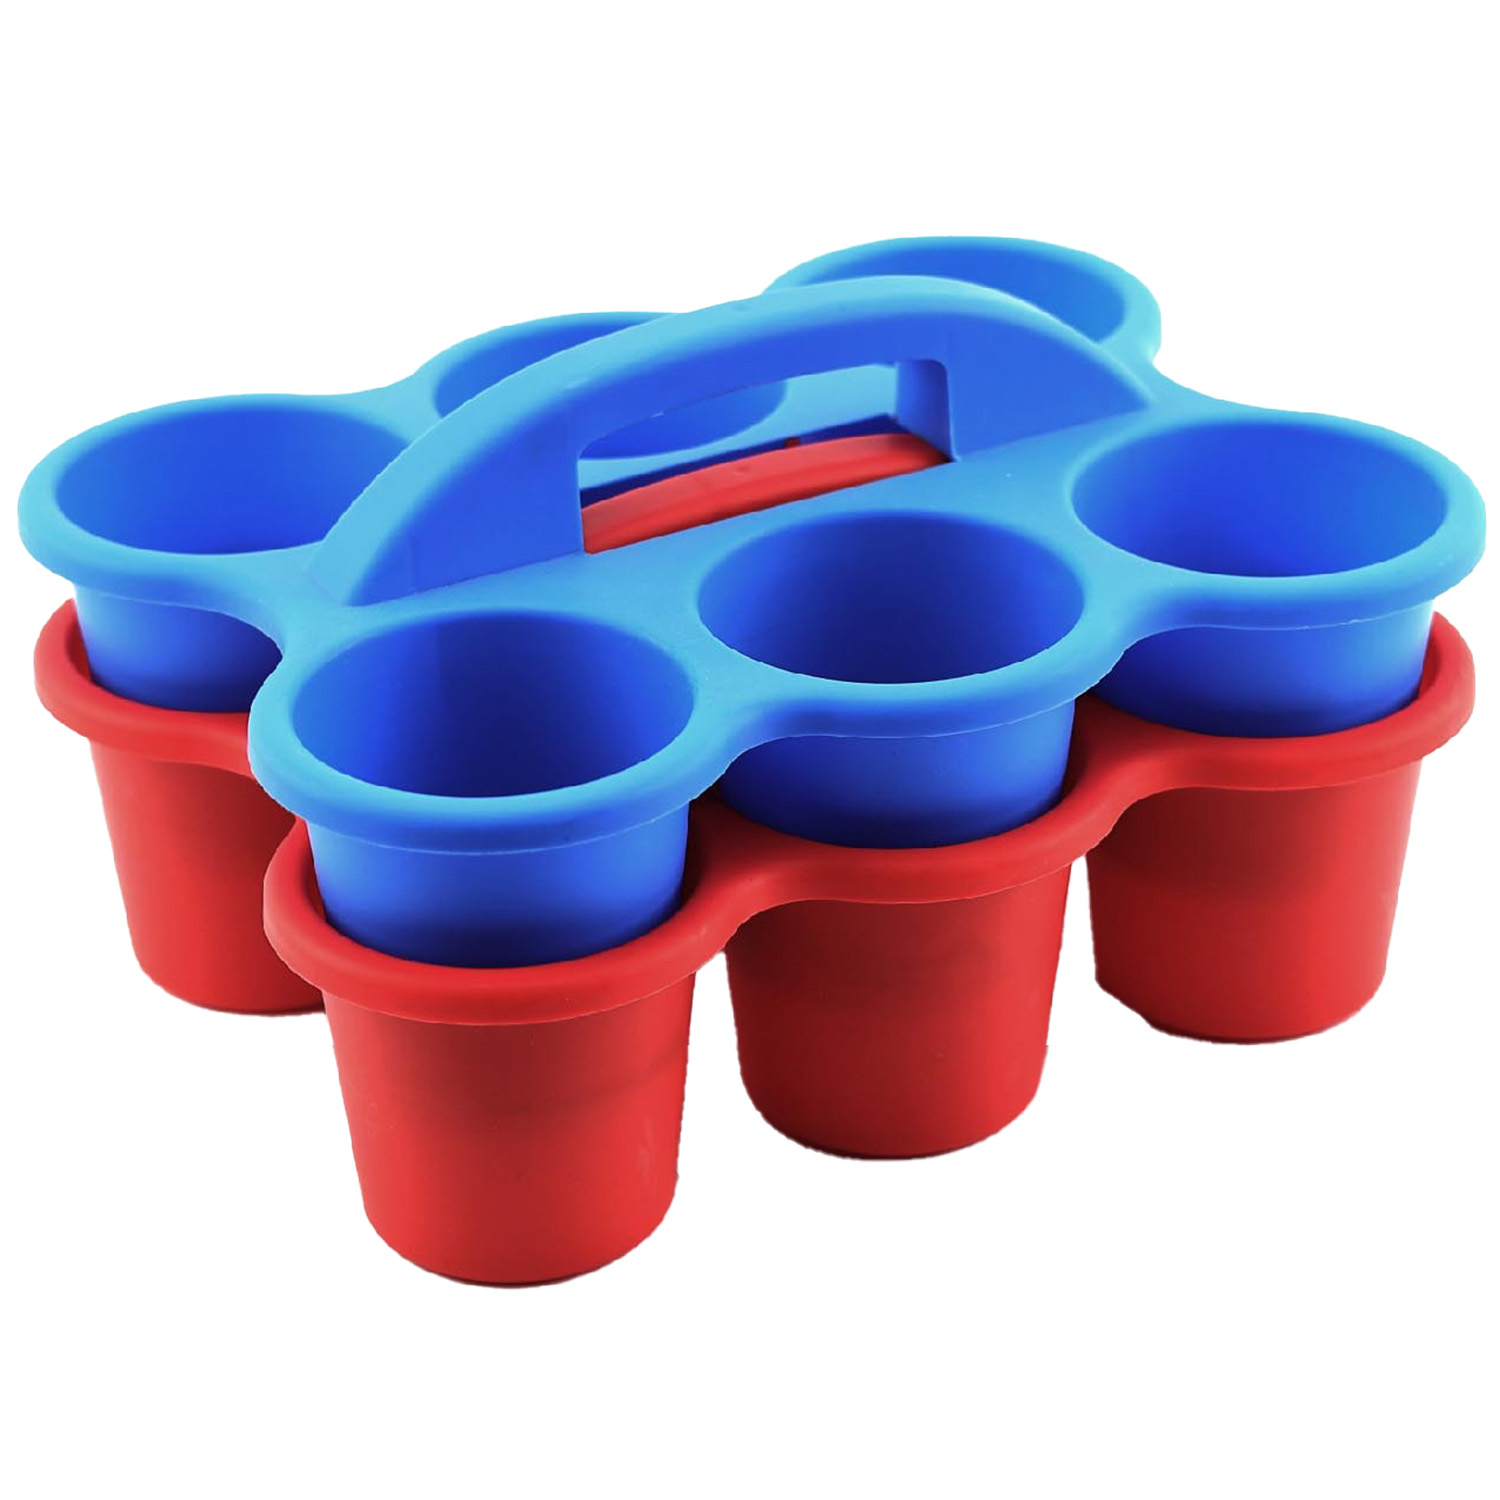 6 Cup Storage Caddy Image 1